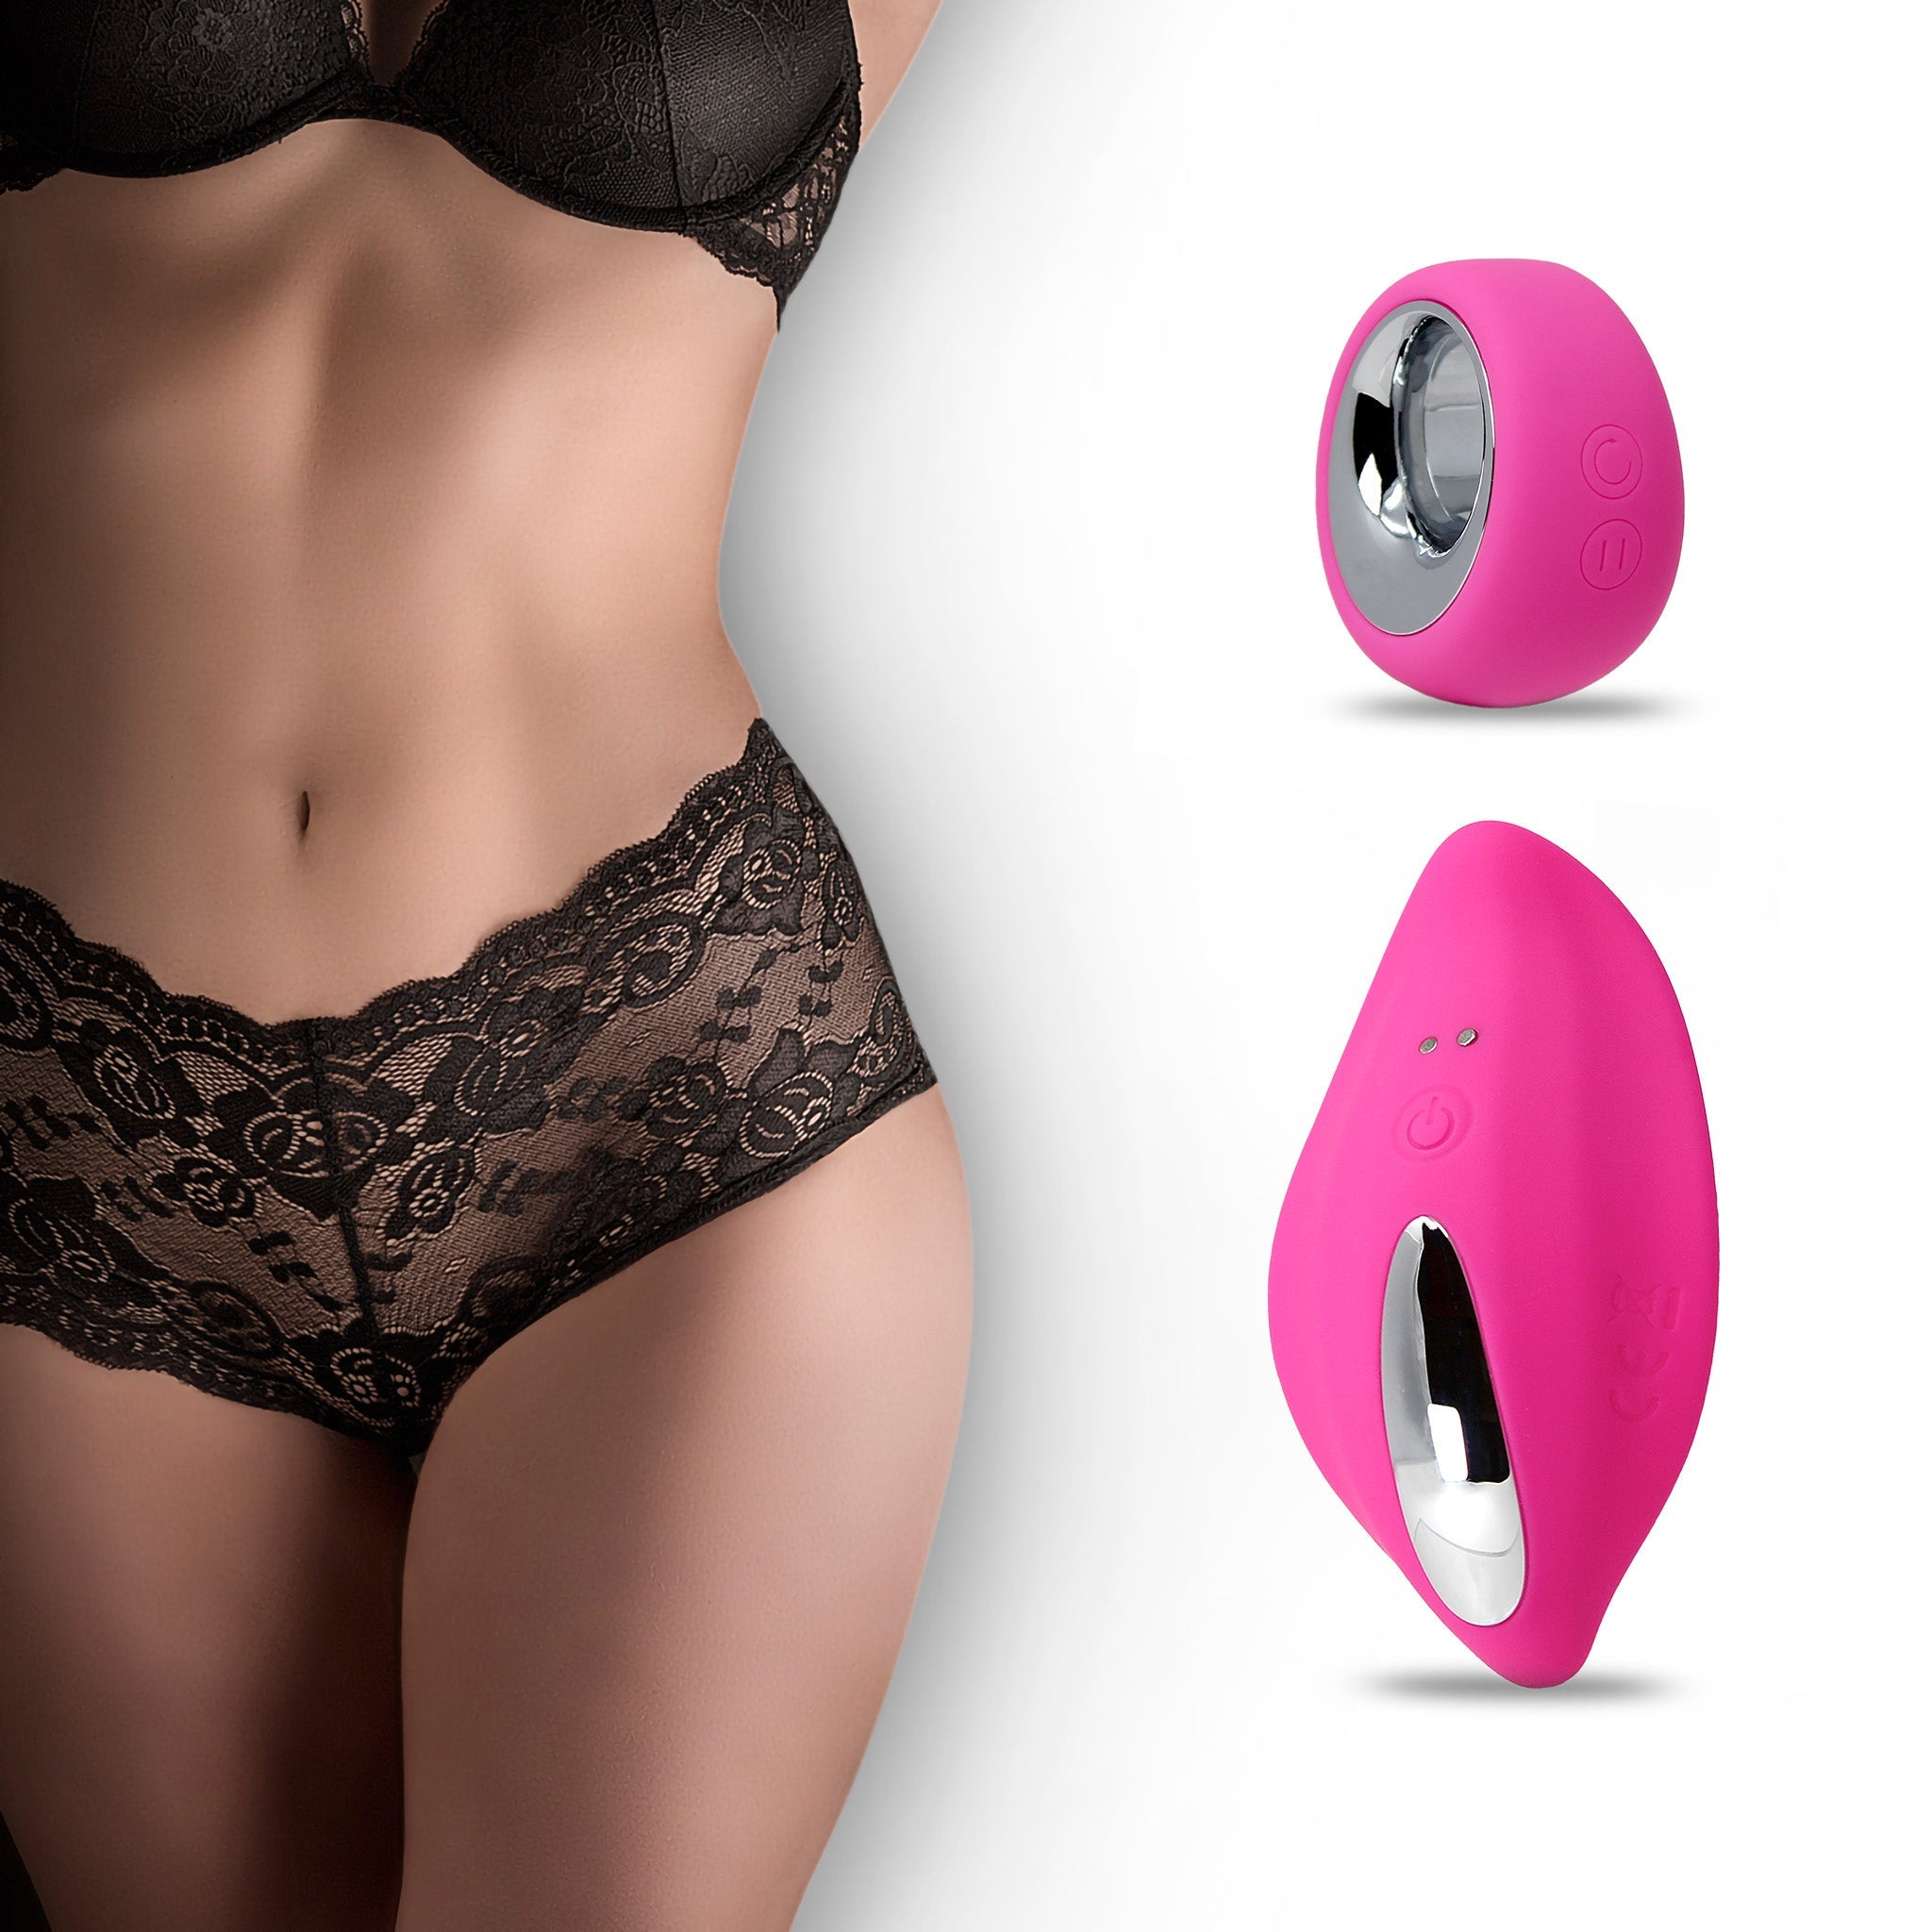 Wireless Remote Control Vibrating Panty Teaser Clit Vibrator Sex Toys for Couple